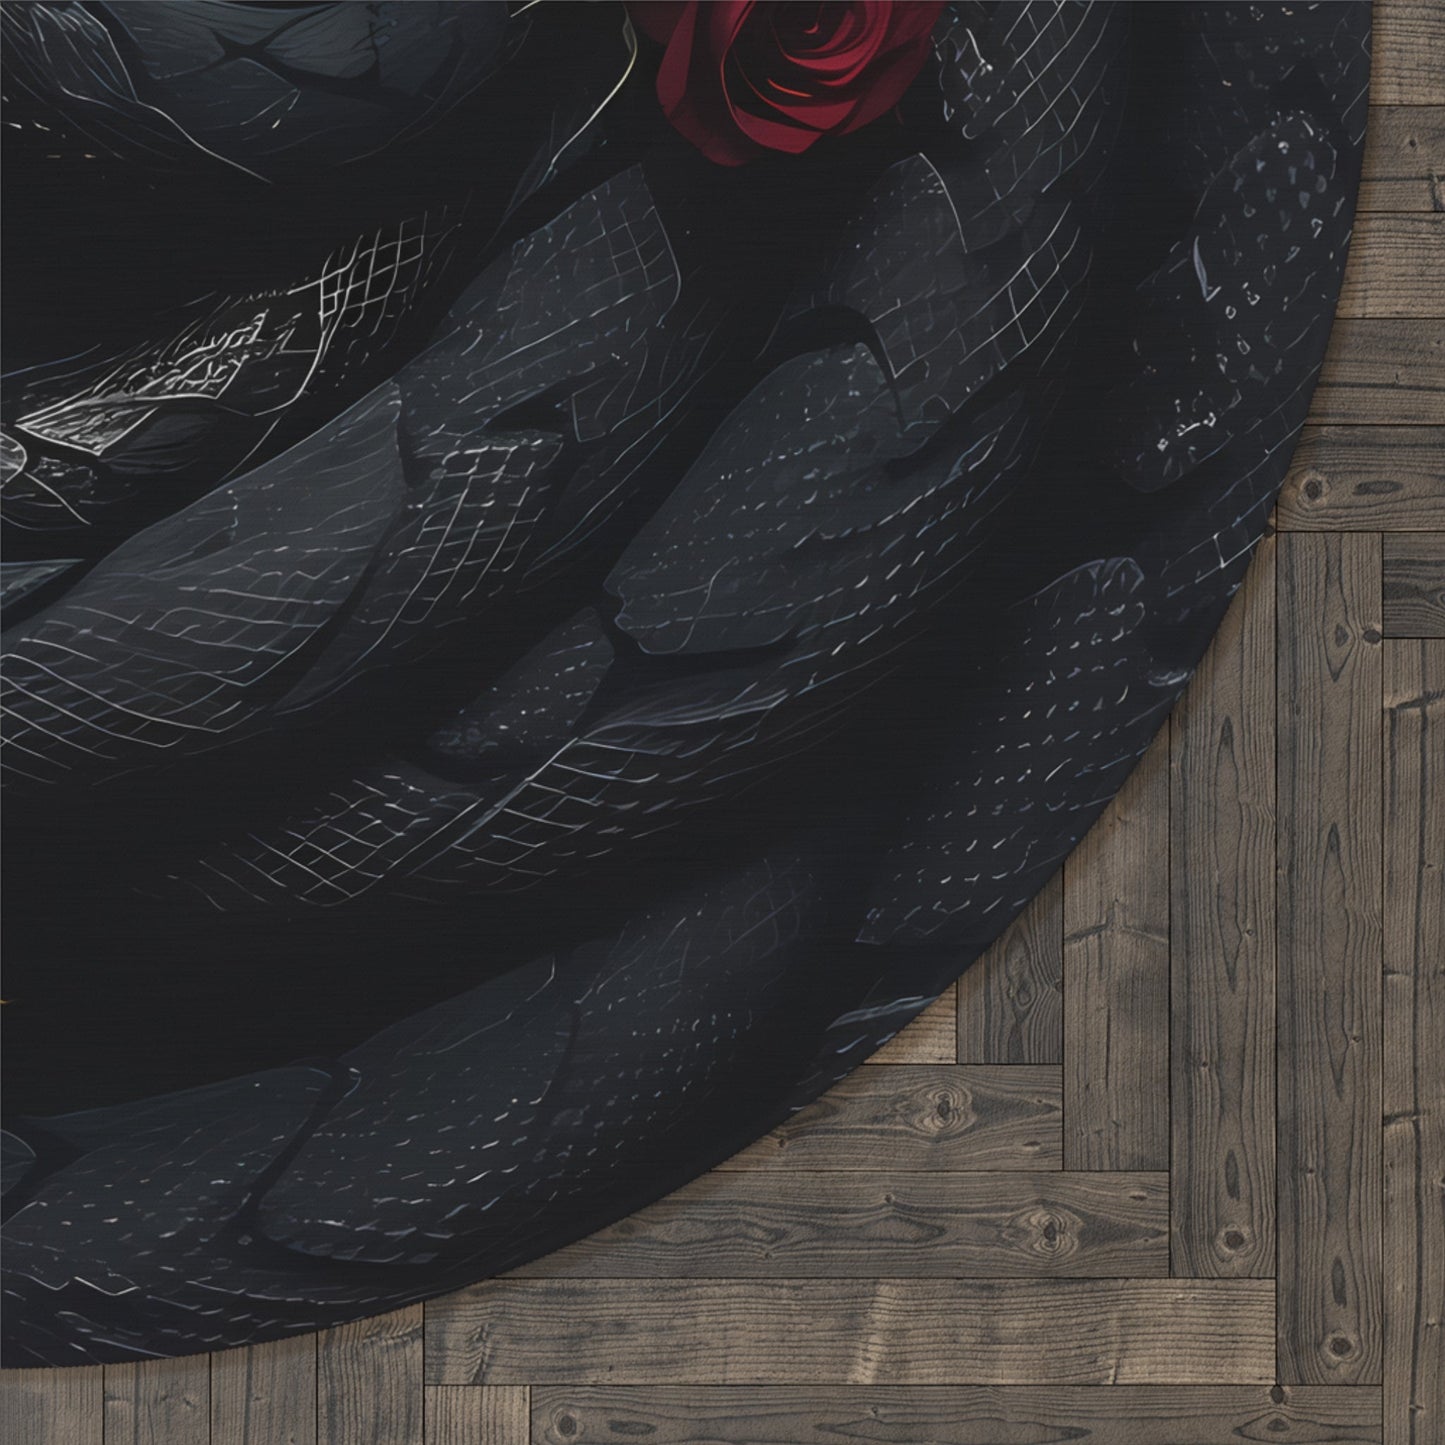 Black Coiled Snake and Red Roses Round Area RugHome DecorVTZdesigns60" × 60"academiaCarpetdark